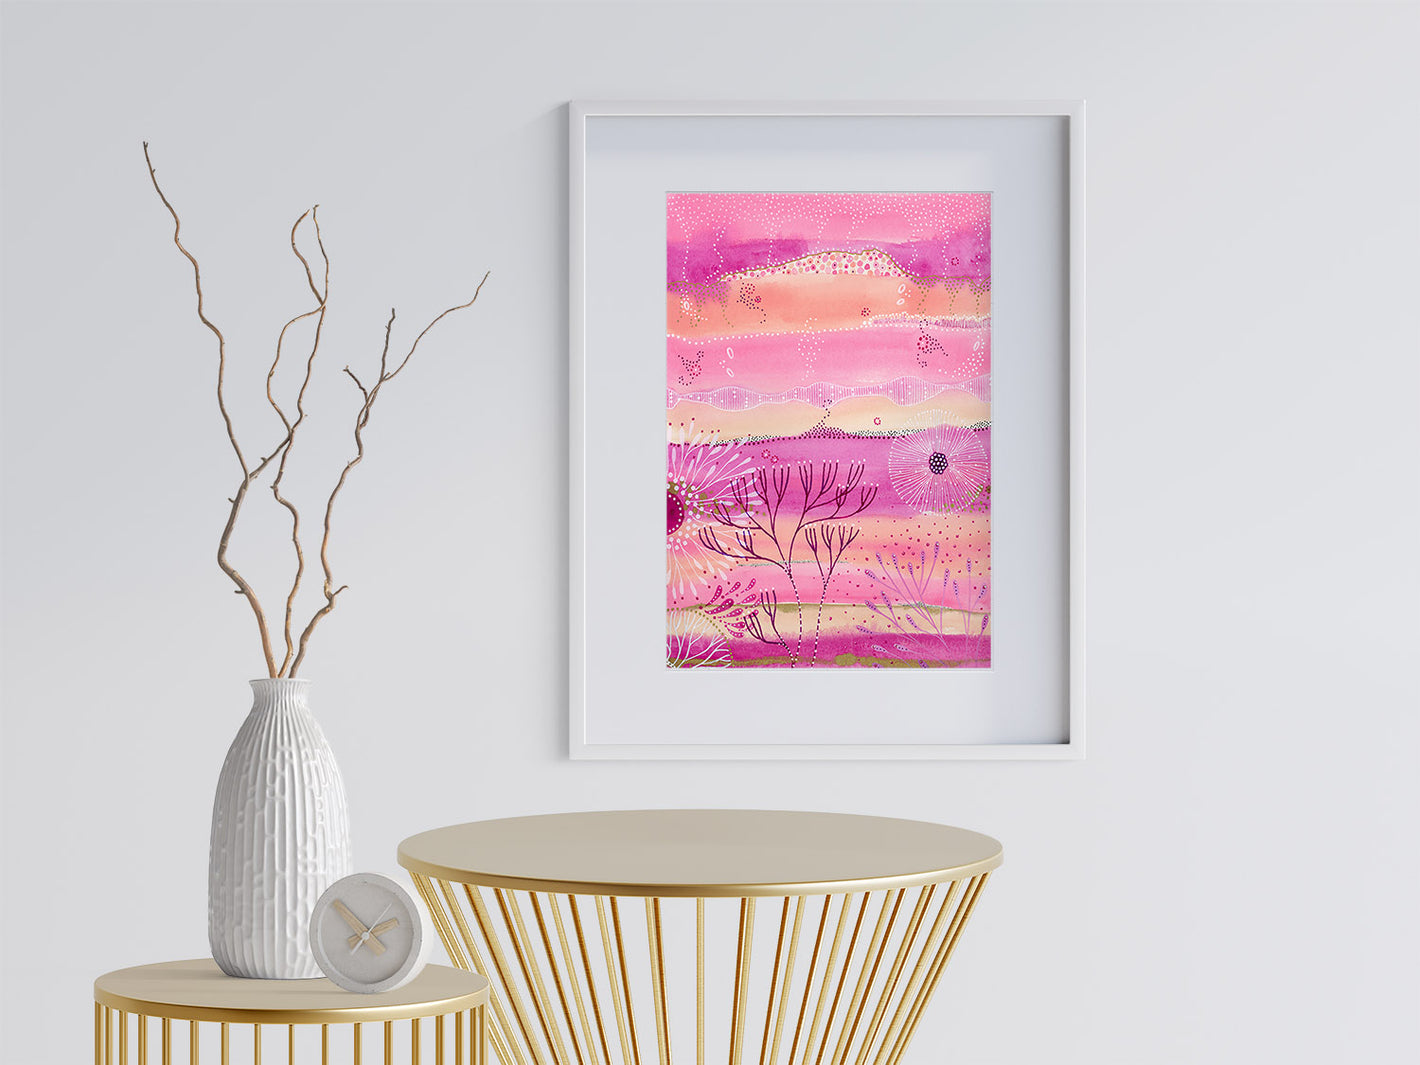 This image is an abstract painting of a coral reef done by joanne grant art.  The painting is shades of pink.  In white ink there are abstract under sea flora.  Many abstract coral reef plants are in the painting also.  The painting is framed in a white frame and it is hanging on a white wall.  There are two gold modern metal tables in the scene in front of the painting.  On the left table is a white textured vase with several dried branches extending from it.  There is also a clock on that table.   